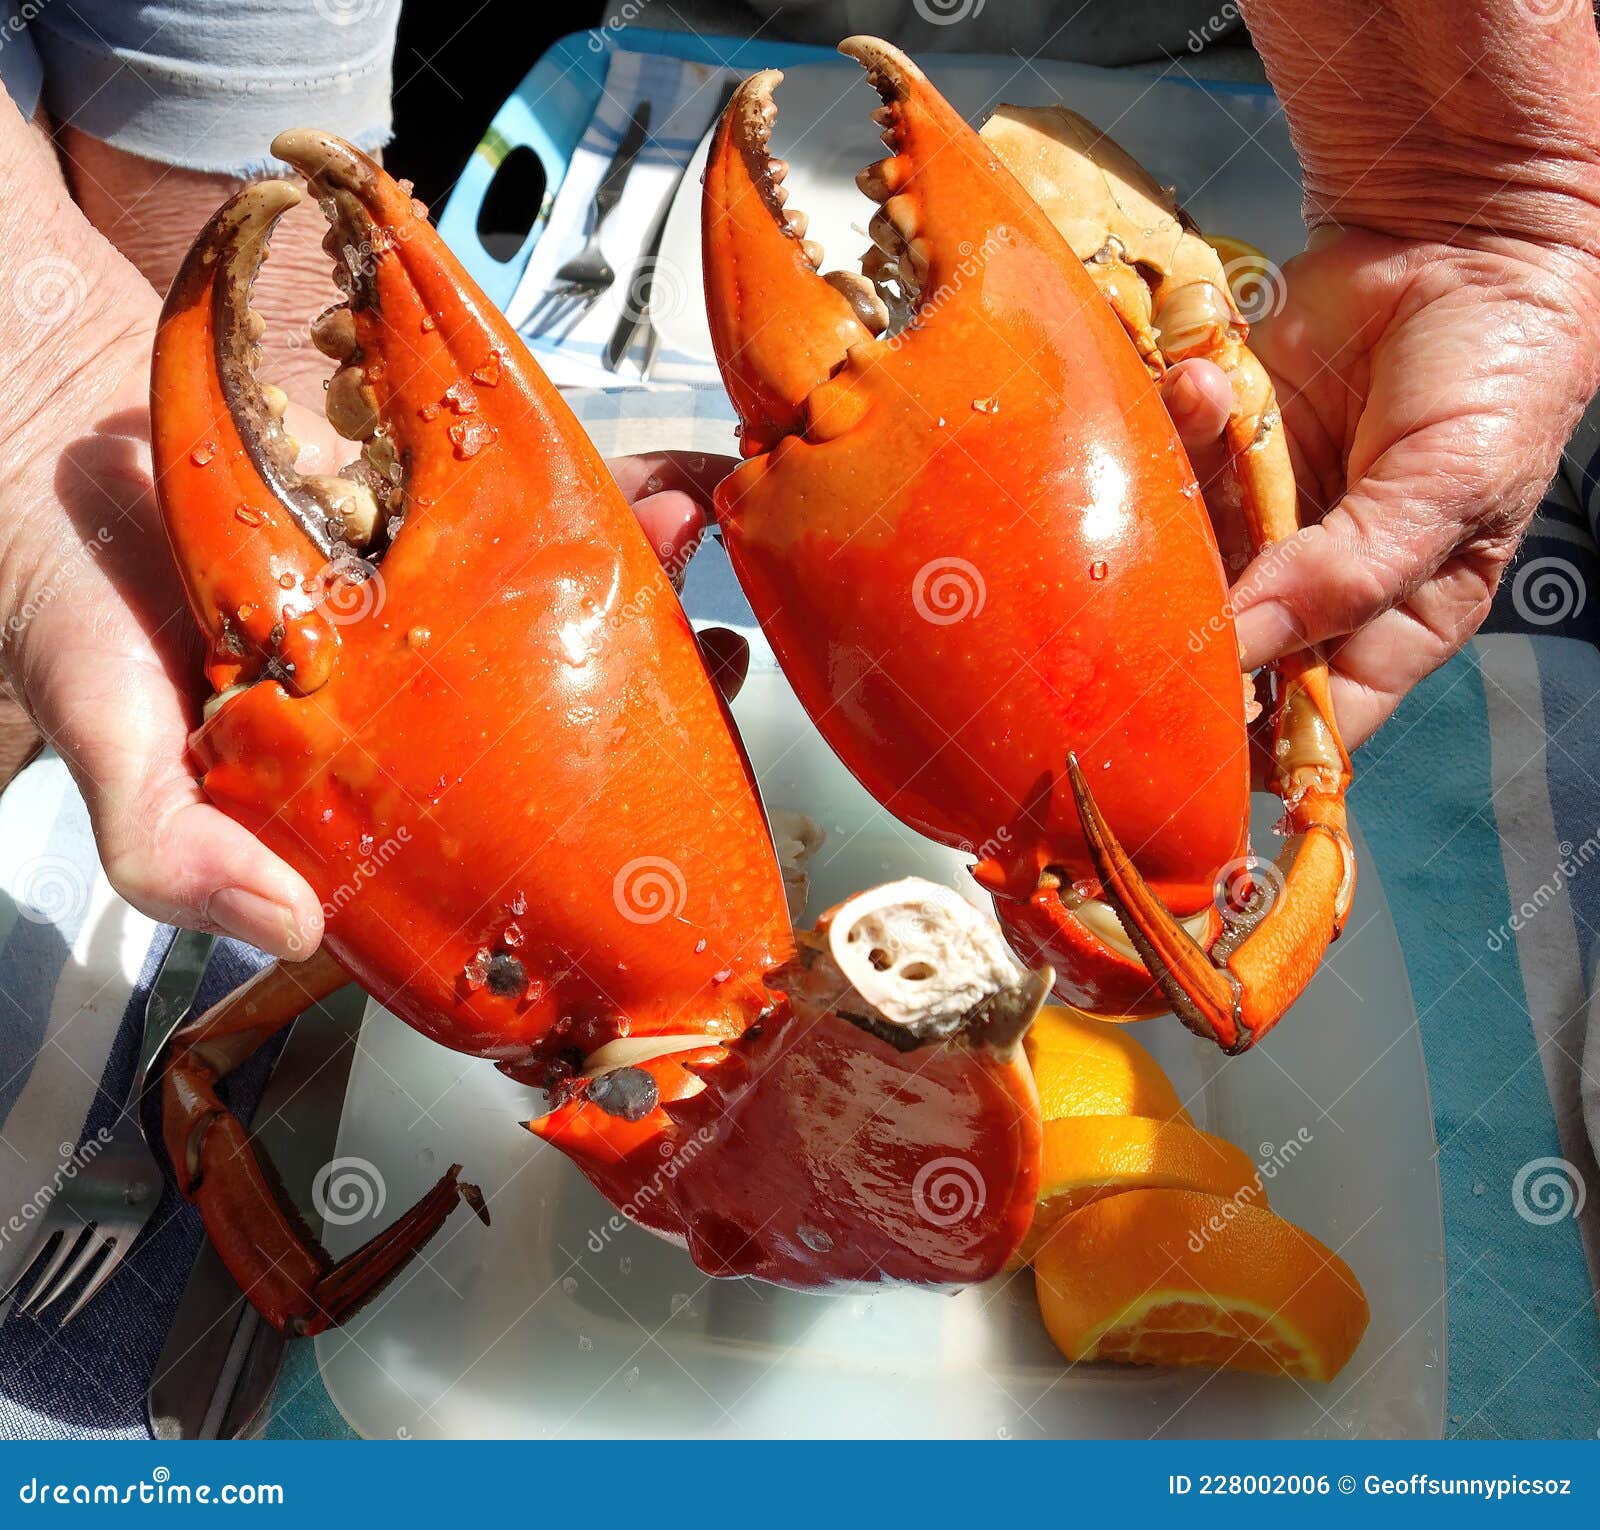 Giant Mud Crab Nippers. Cooked Platter Stock Image of nipper, australia: 228002006